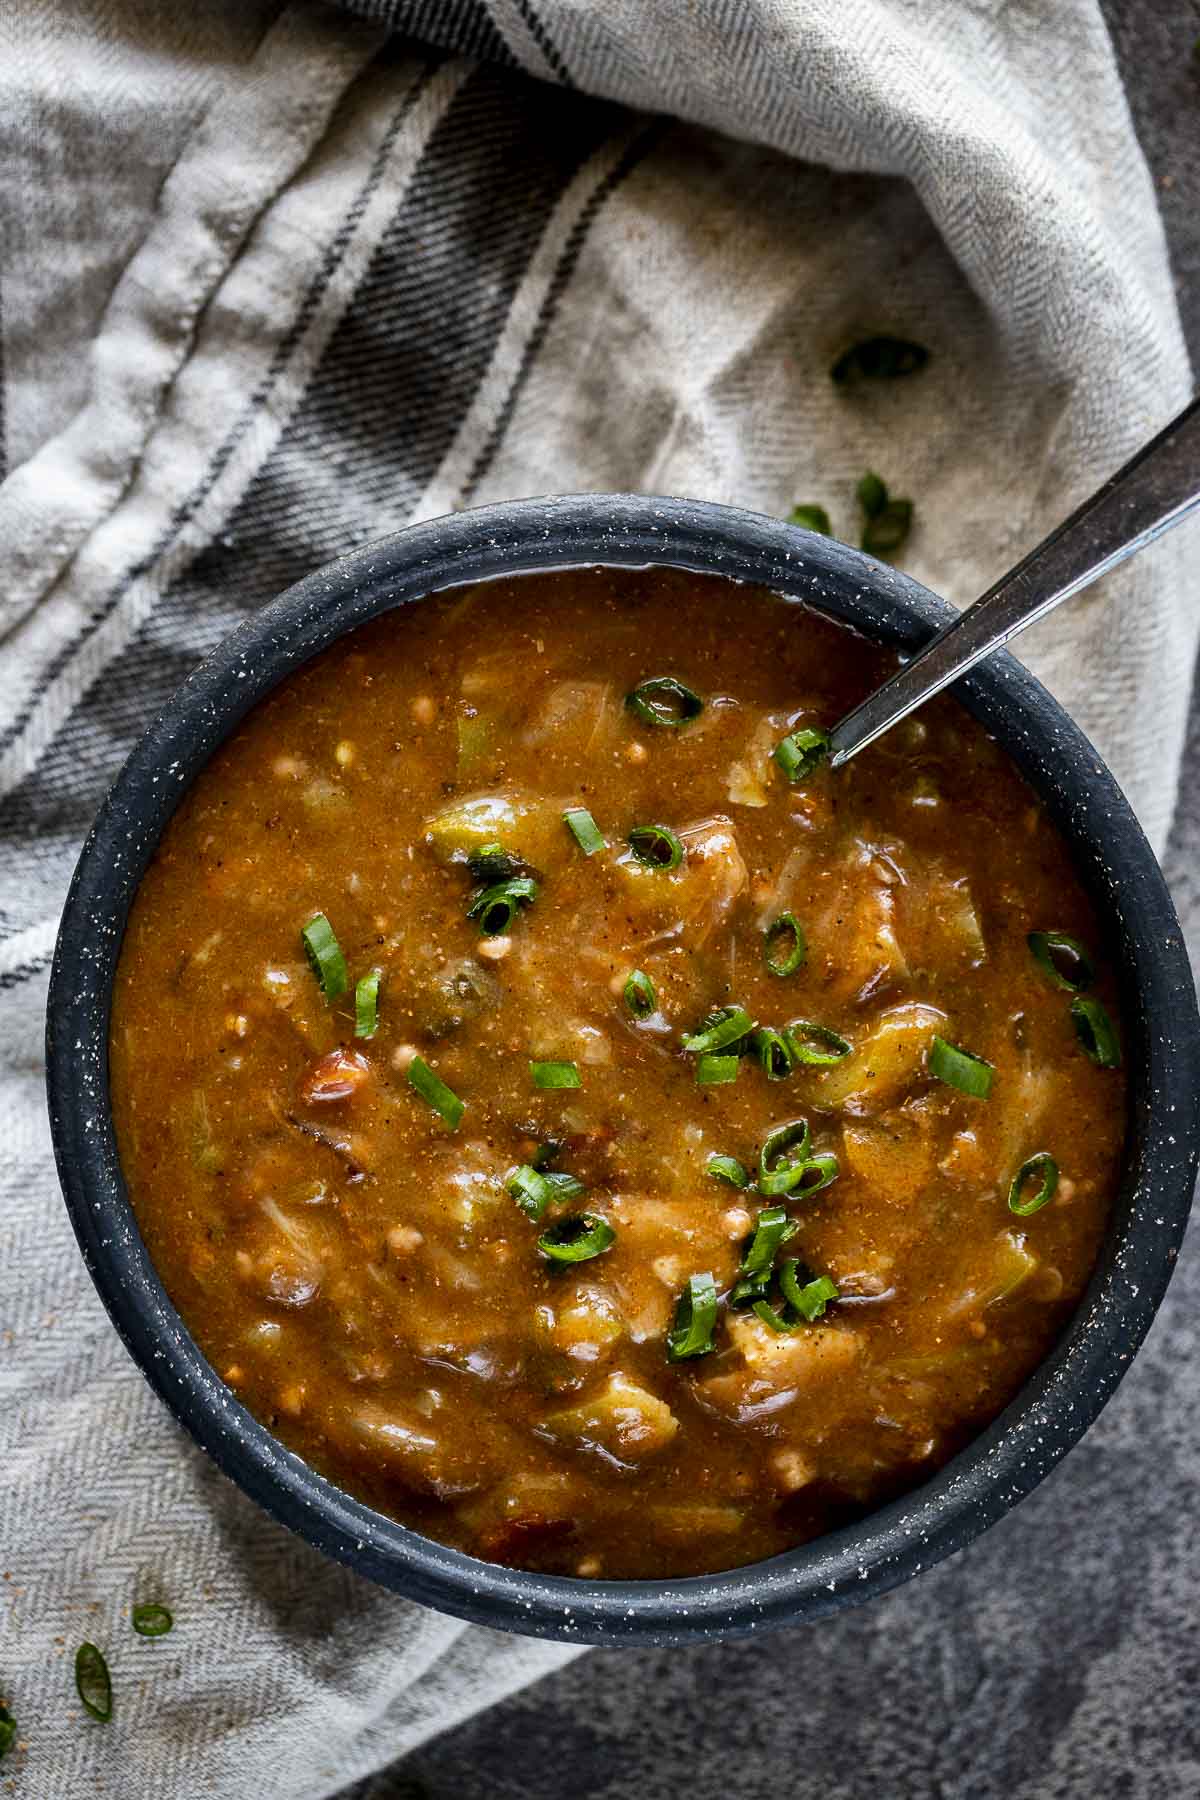 Instant Pot chicken and sausage gumbo in a dark bowl with a spoon.